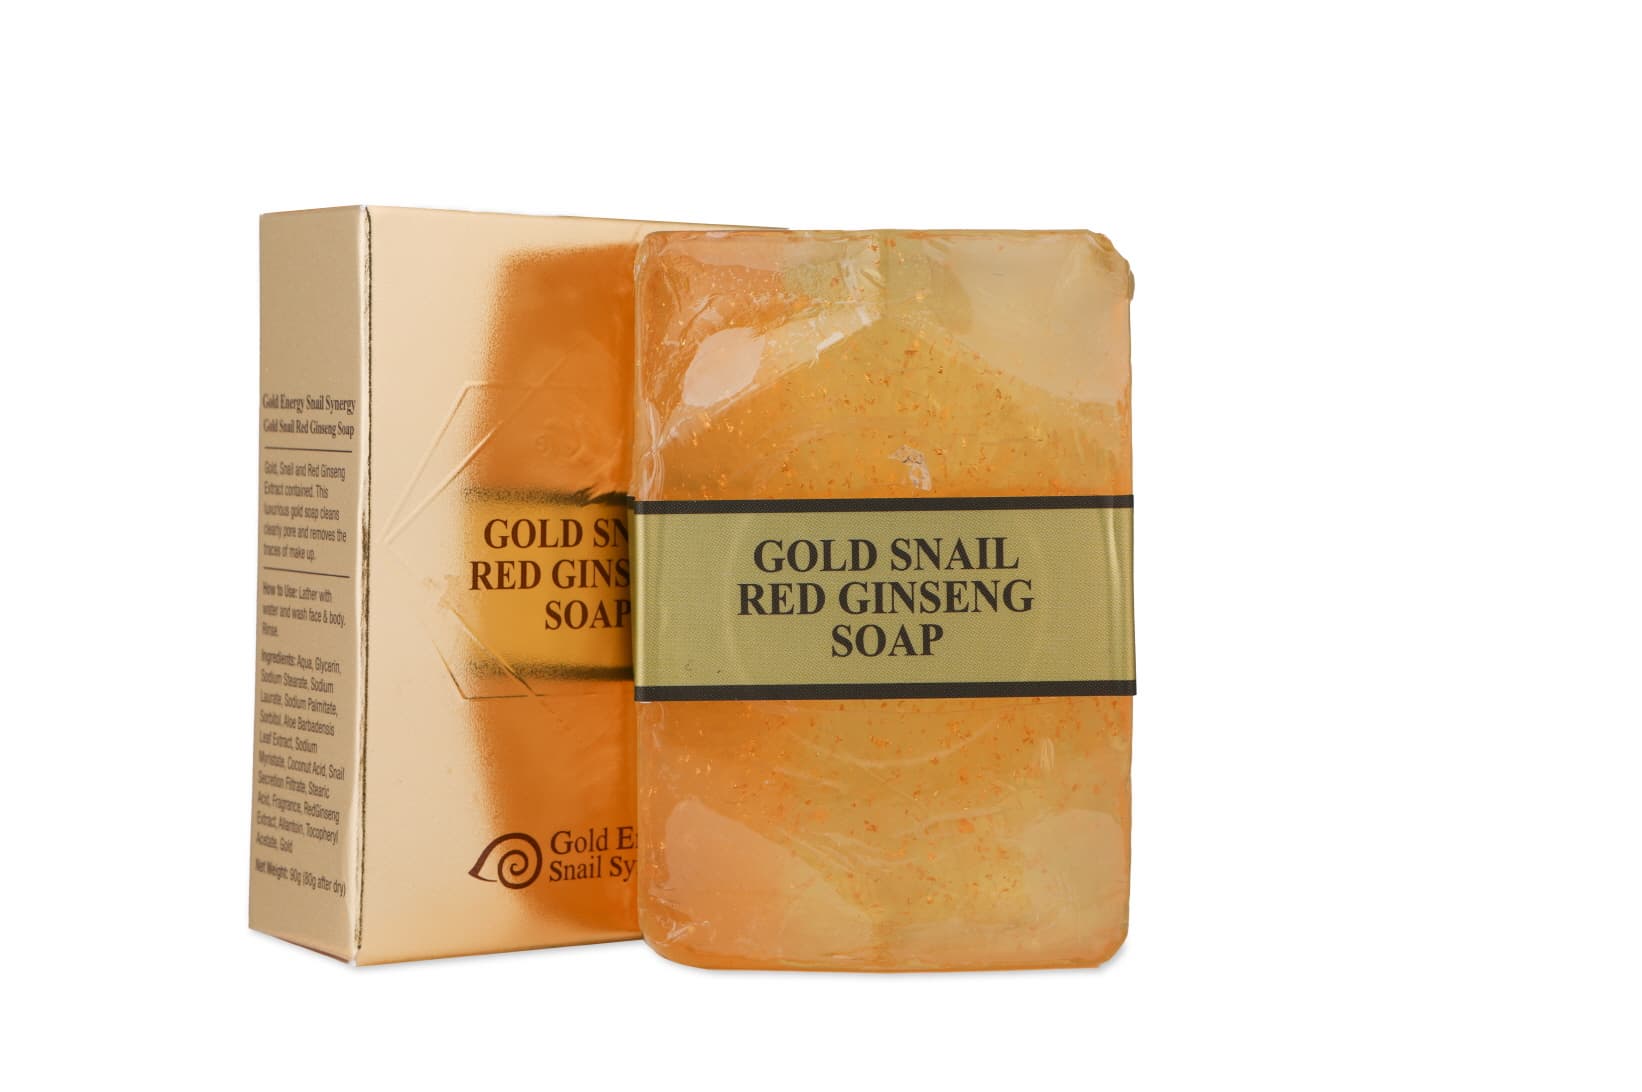 Gold Snail Red Ginseng Soap